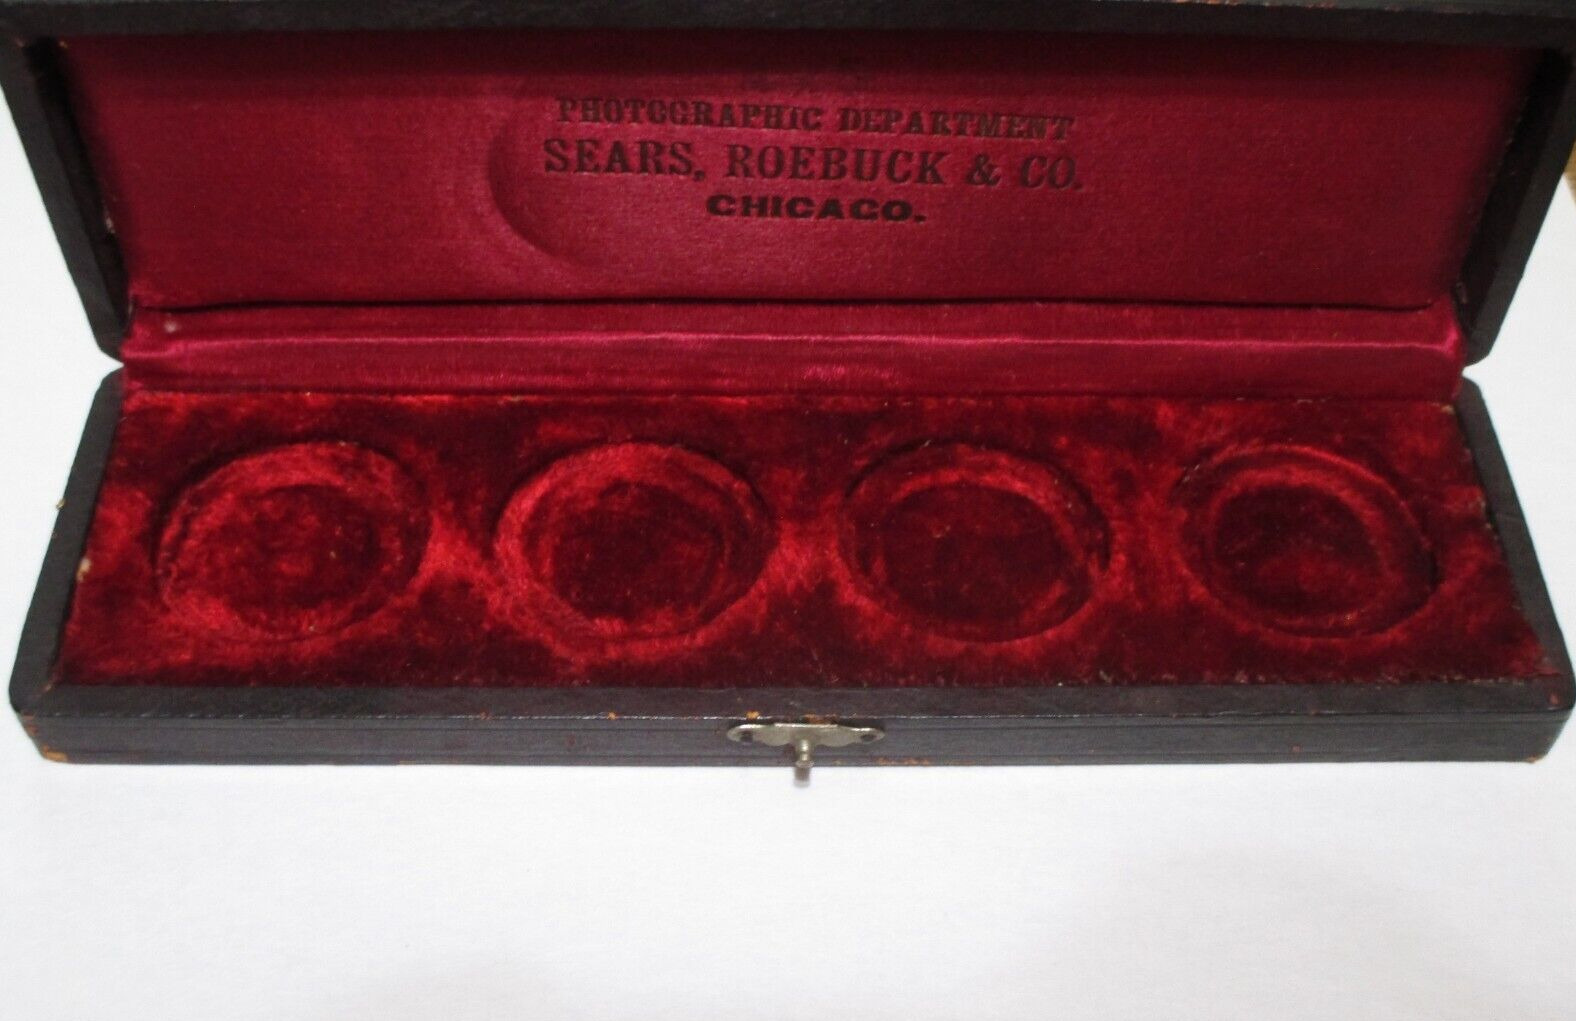 photographic department Sears Roebuck & Co CHICAGO Antique advertising box